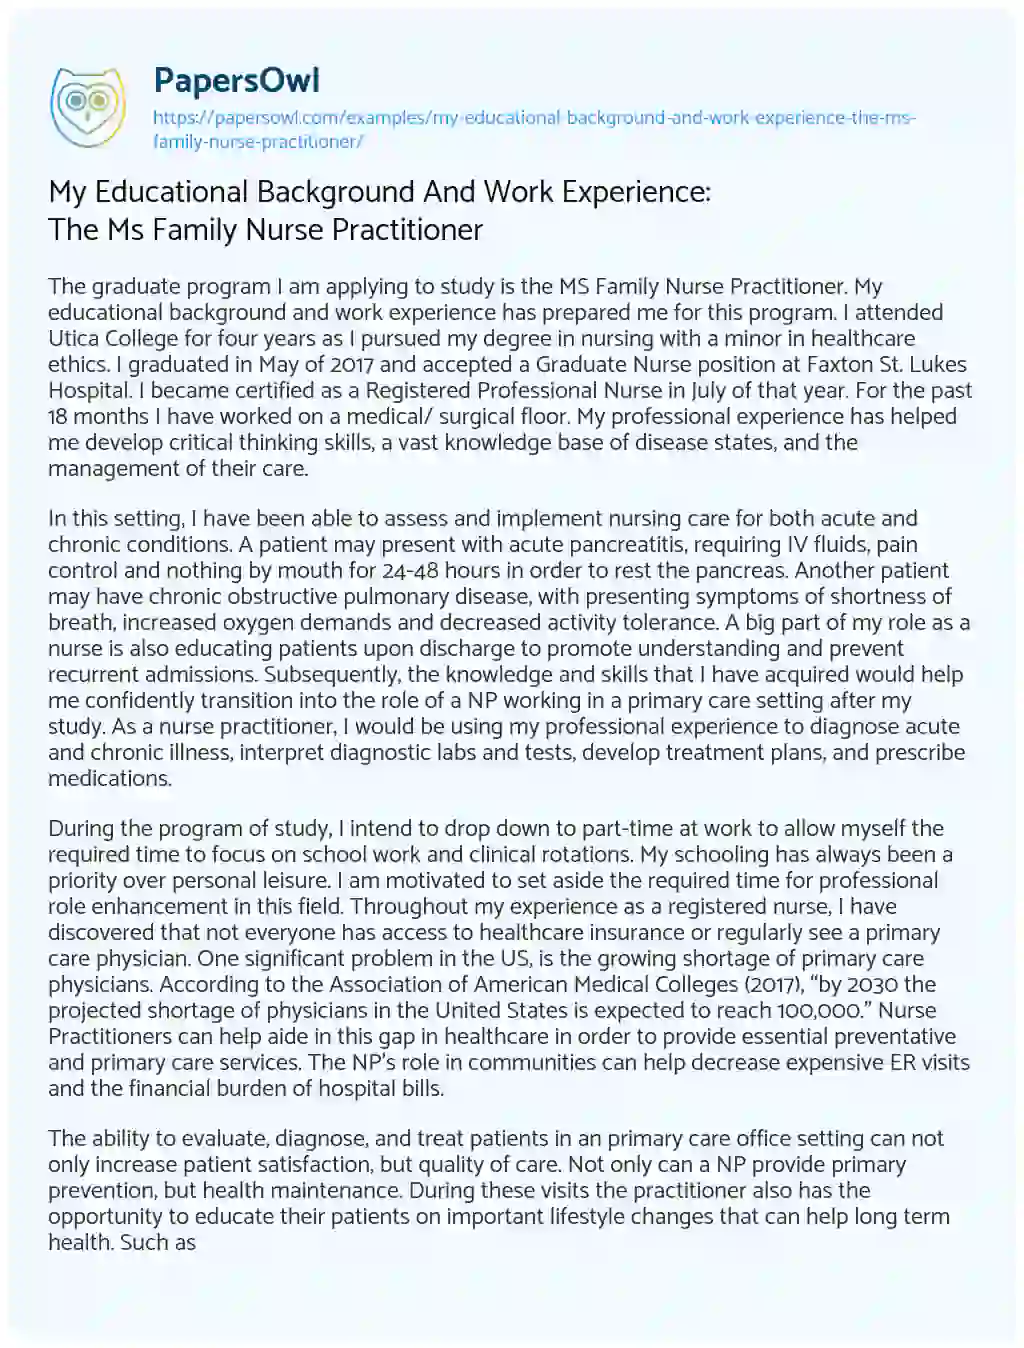 Essay on My Educational Background and Work Experience: the Ms Family Nurse Practitioner